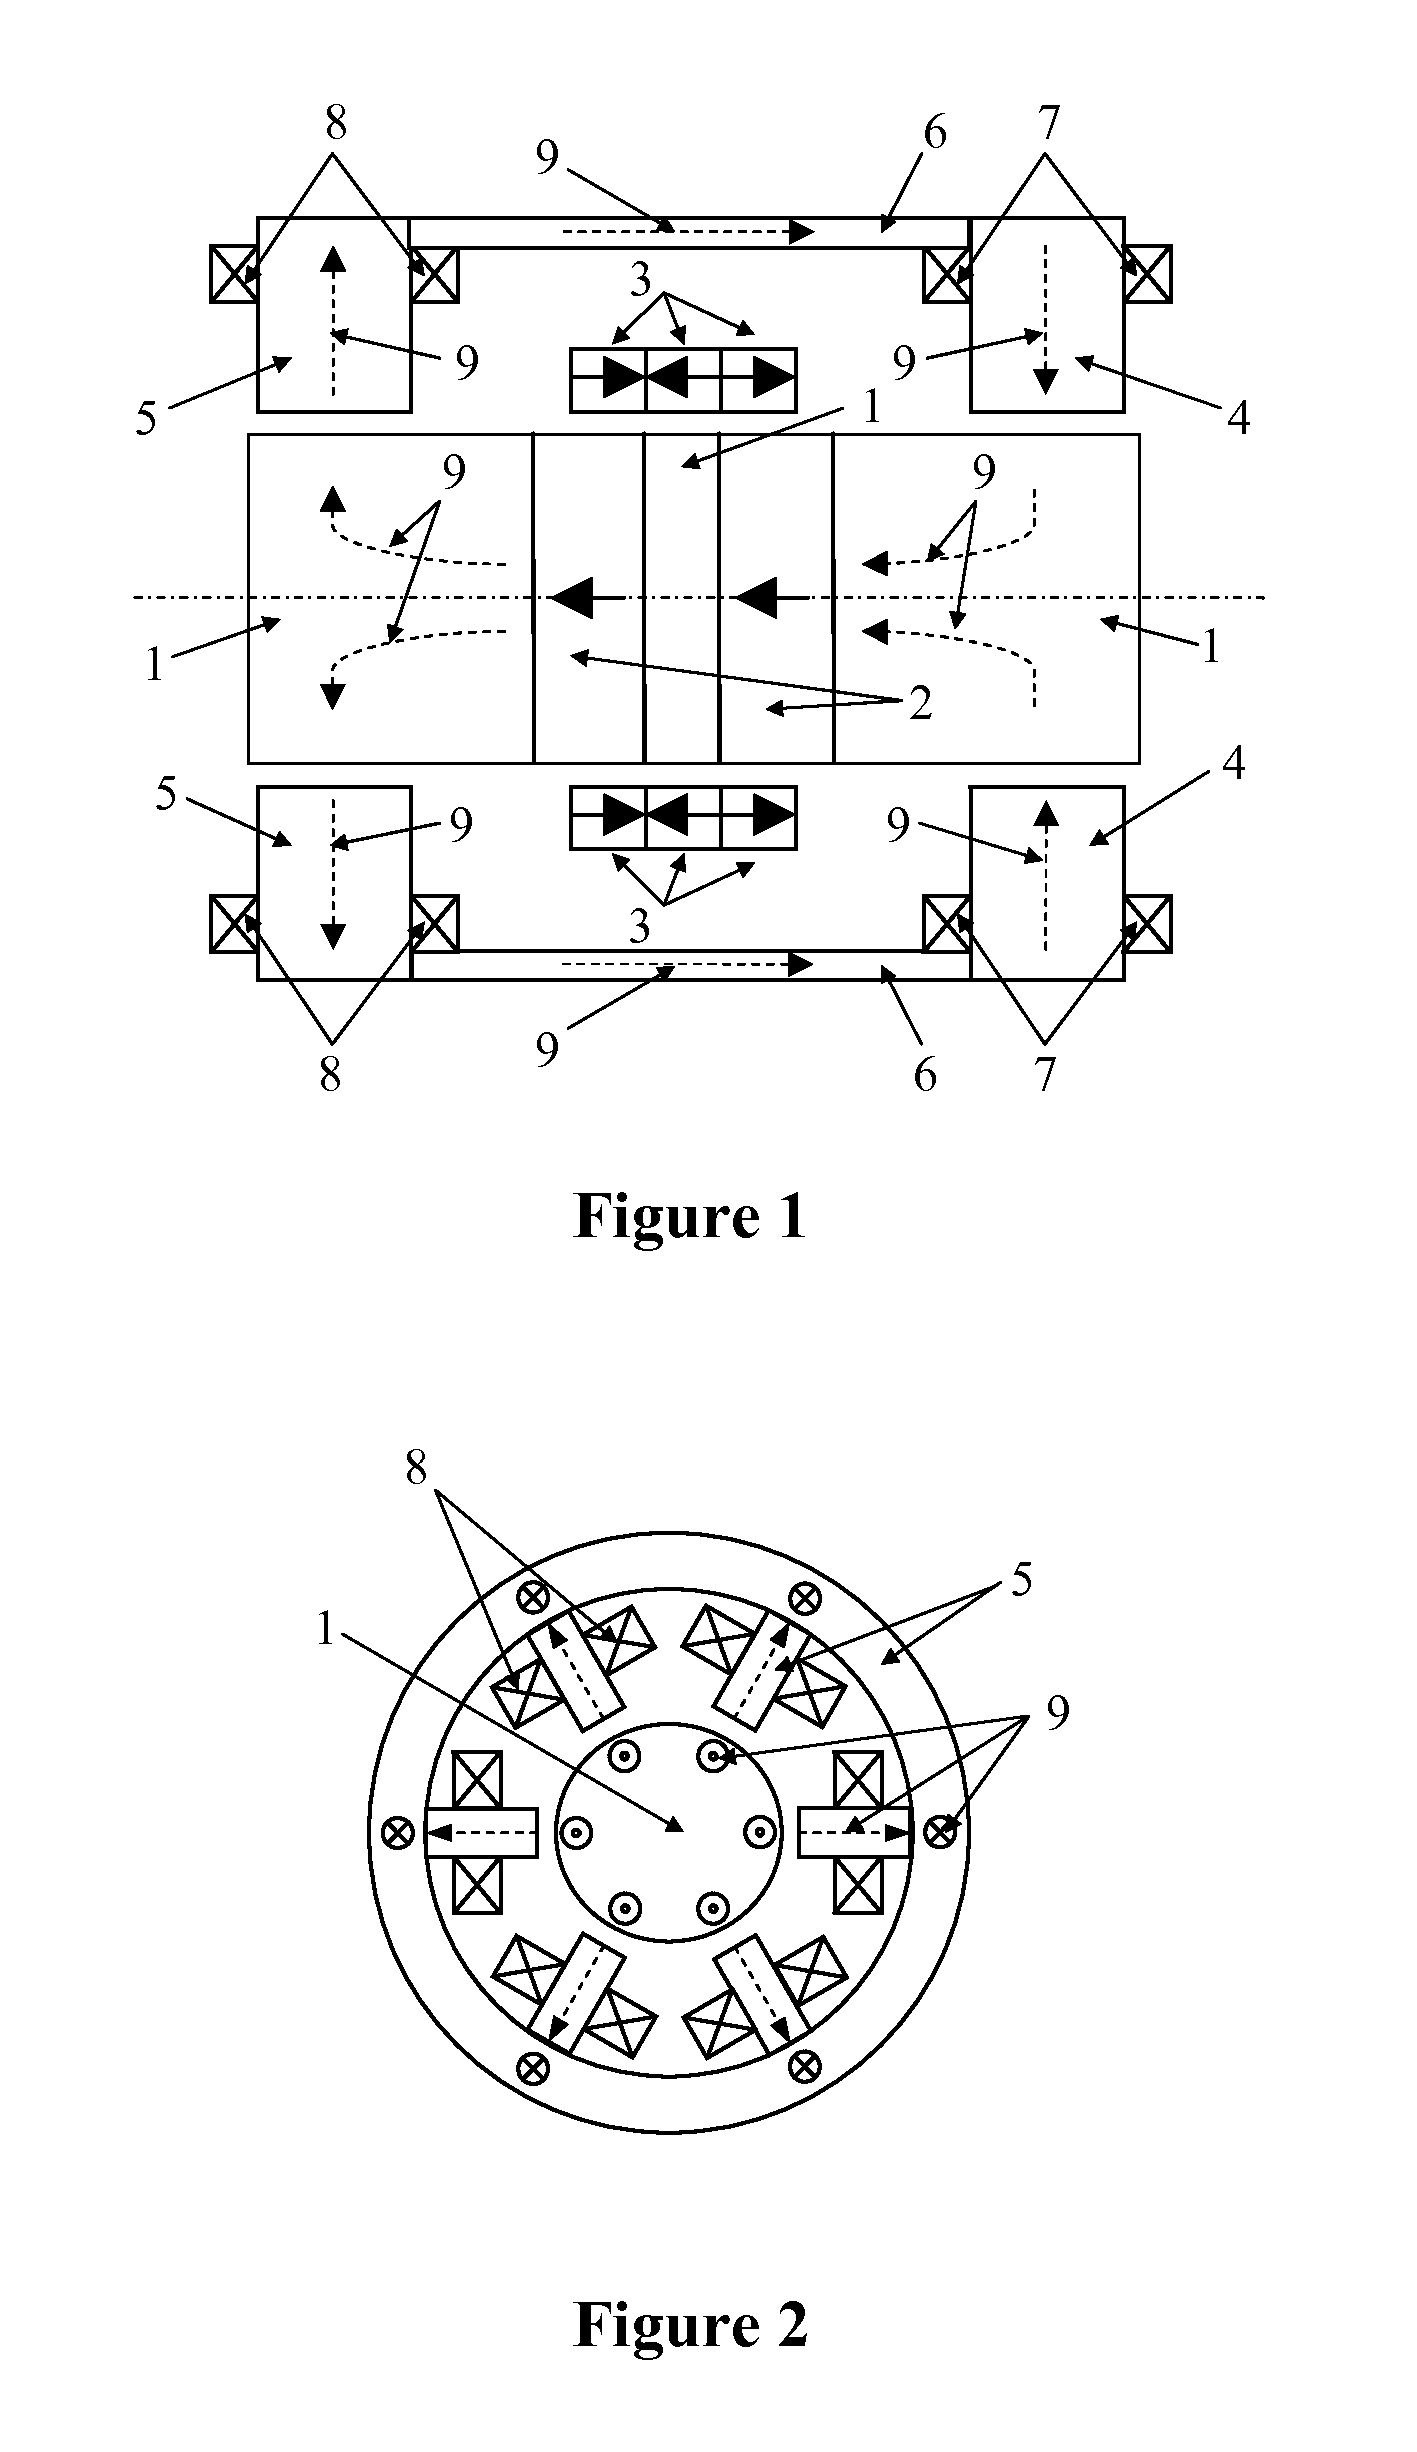 Hybrid Five Axis Magnetic Bearing System Using Axial Passive PM Bearing Magnet Paths and Radial Active Magnetic Bearings with Permanent Magnet Bias and Related Method